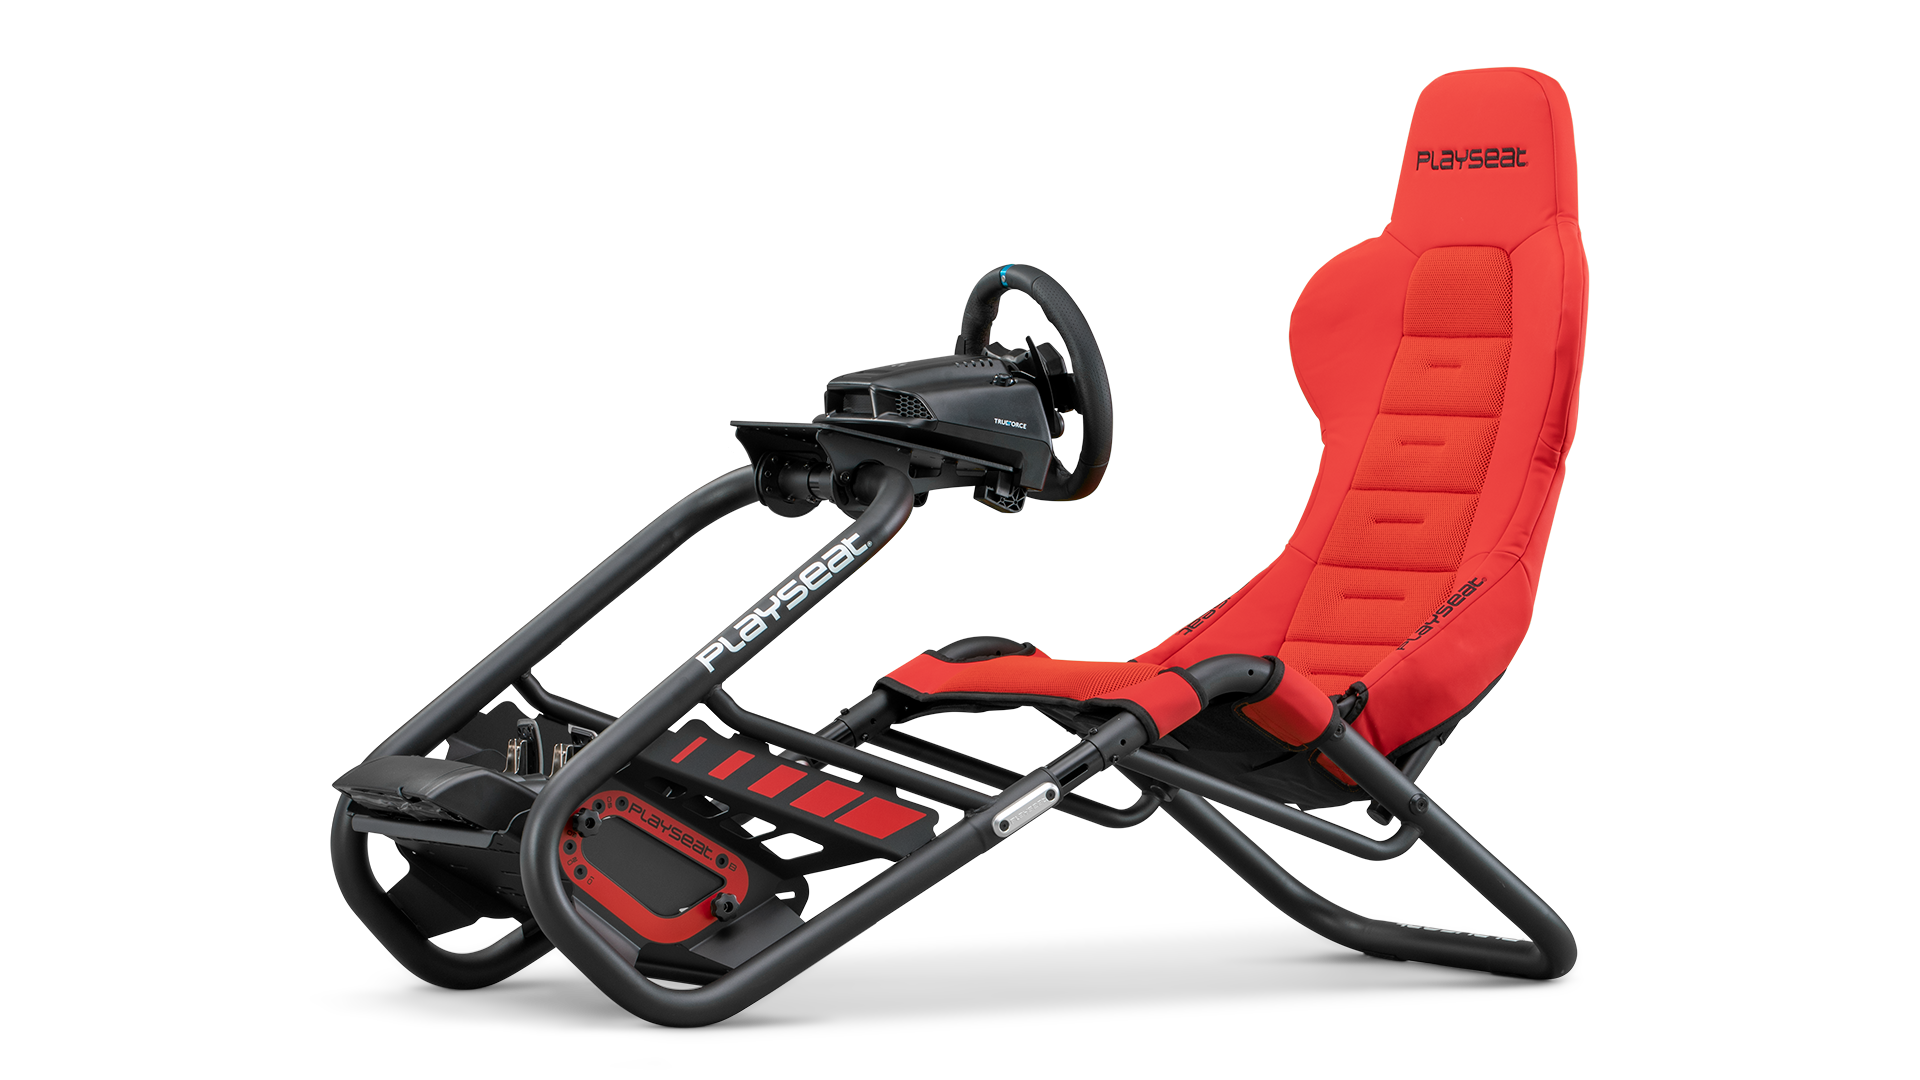 playseat-trophy-red-direct-drive-simulator-front-angle-view-logitech-1920x1080-3.png